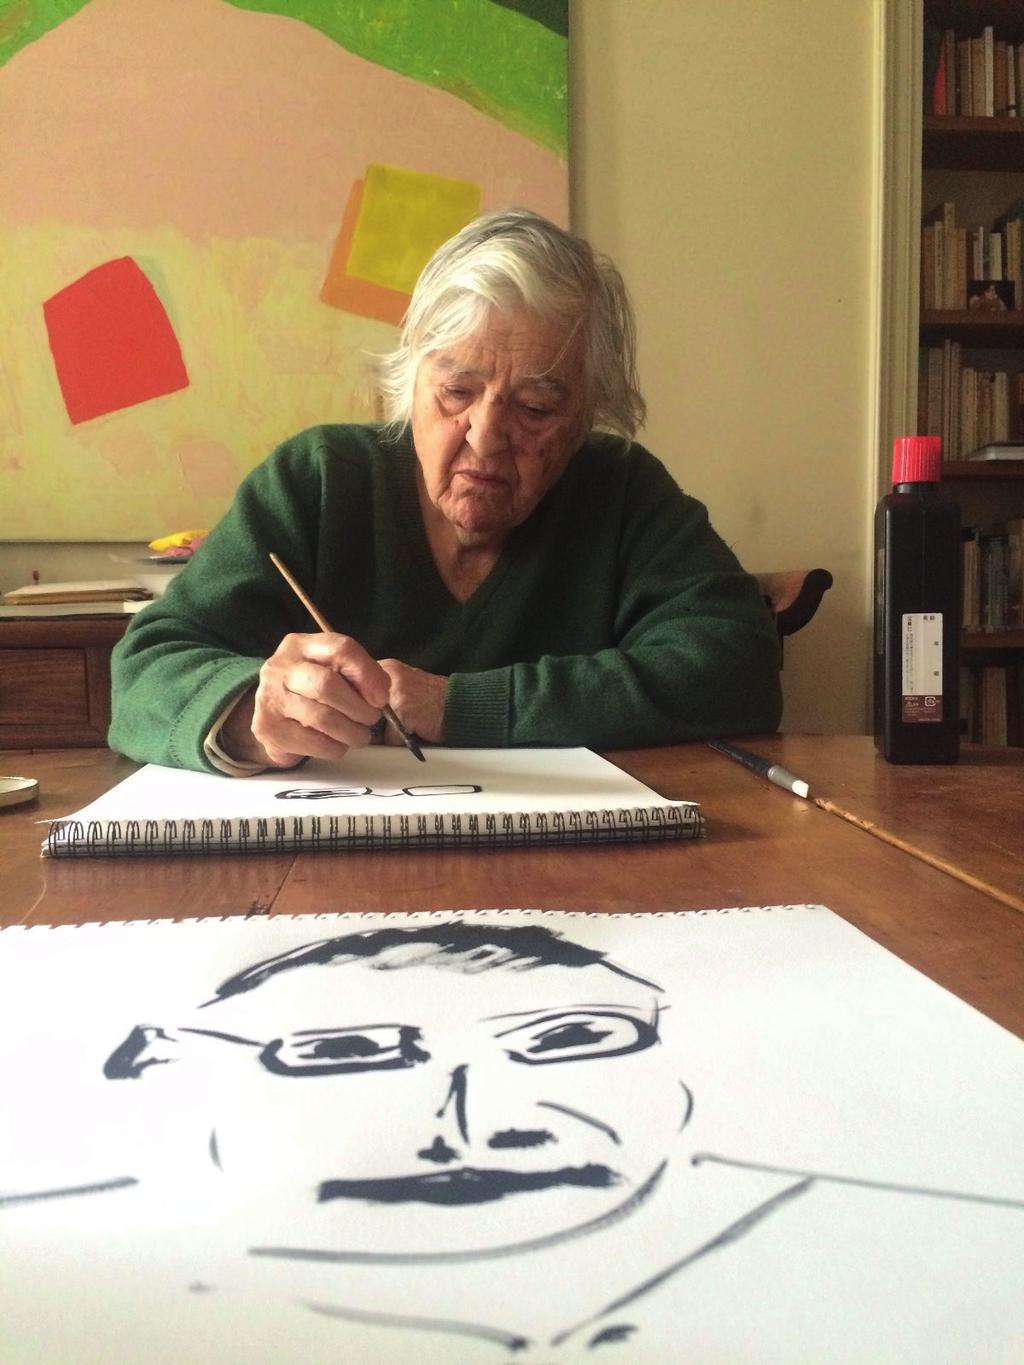 Born in 1925 in Beirut (Lebanon), Etel Adnan is a poet, writer and painter. In Beirut, she was part of the first group of students to study with Gabriel Bounoure at the École des Lettres.